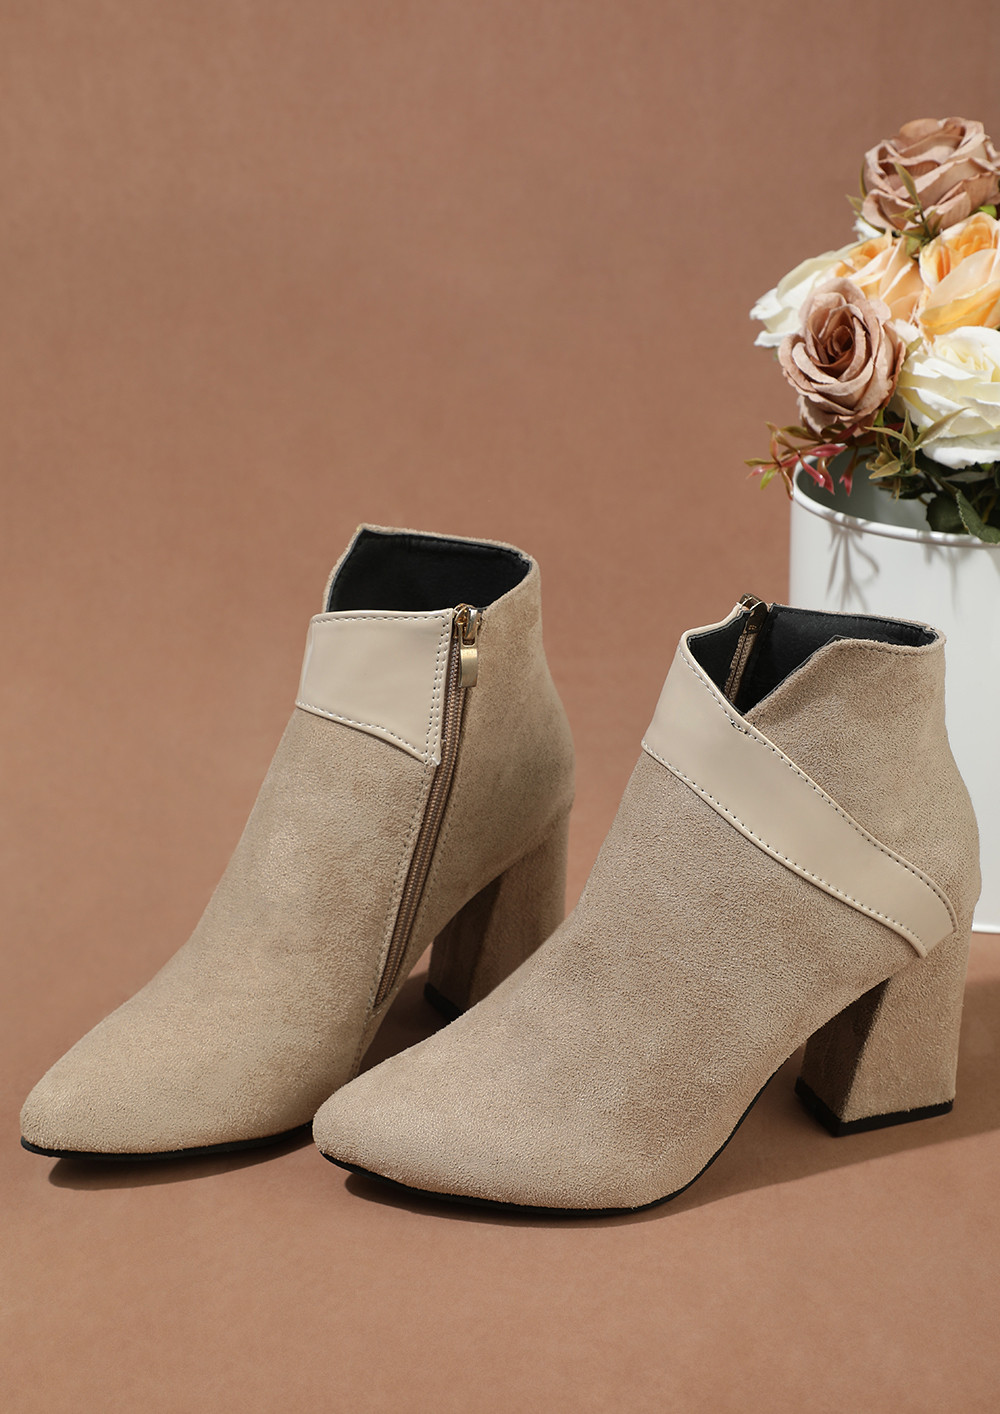 PRETTY NEUTRAL BEIGE ANKLE BOOTS